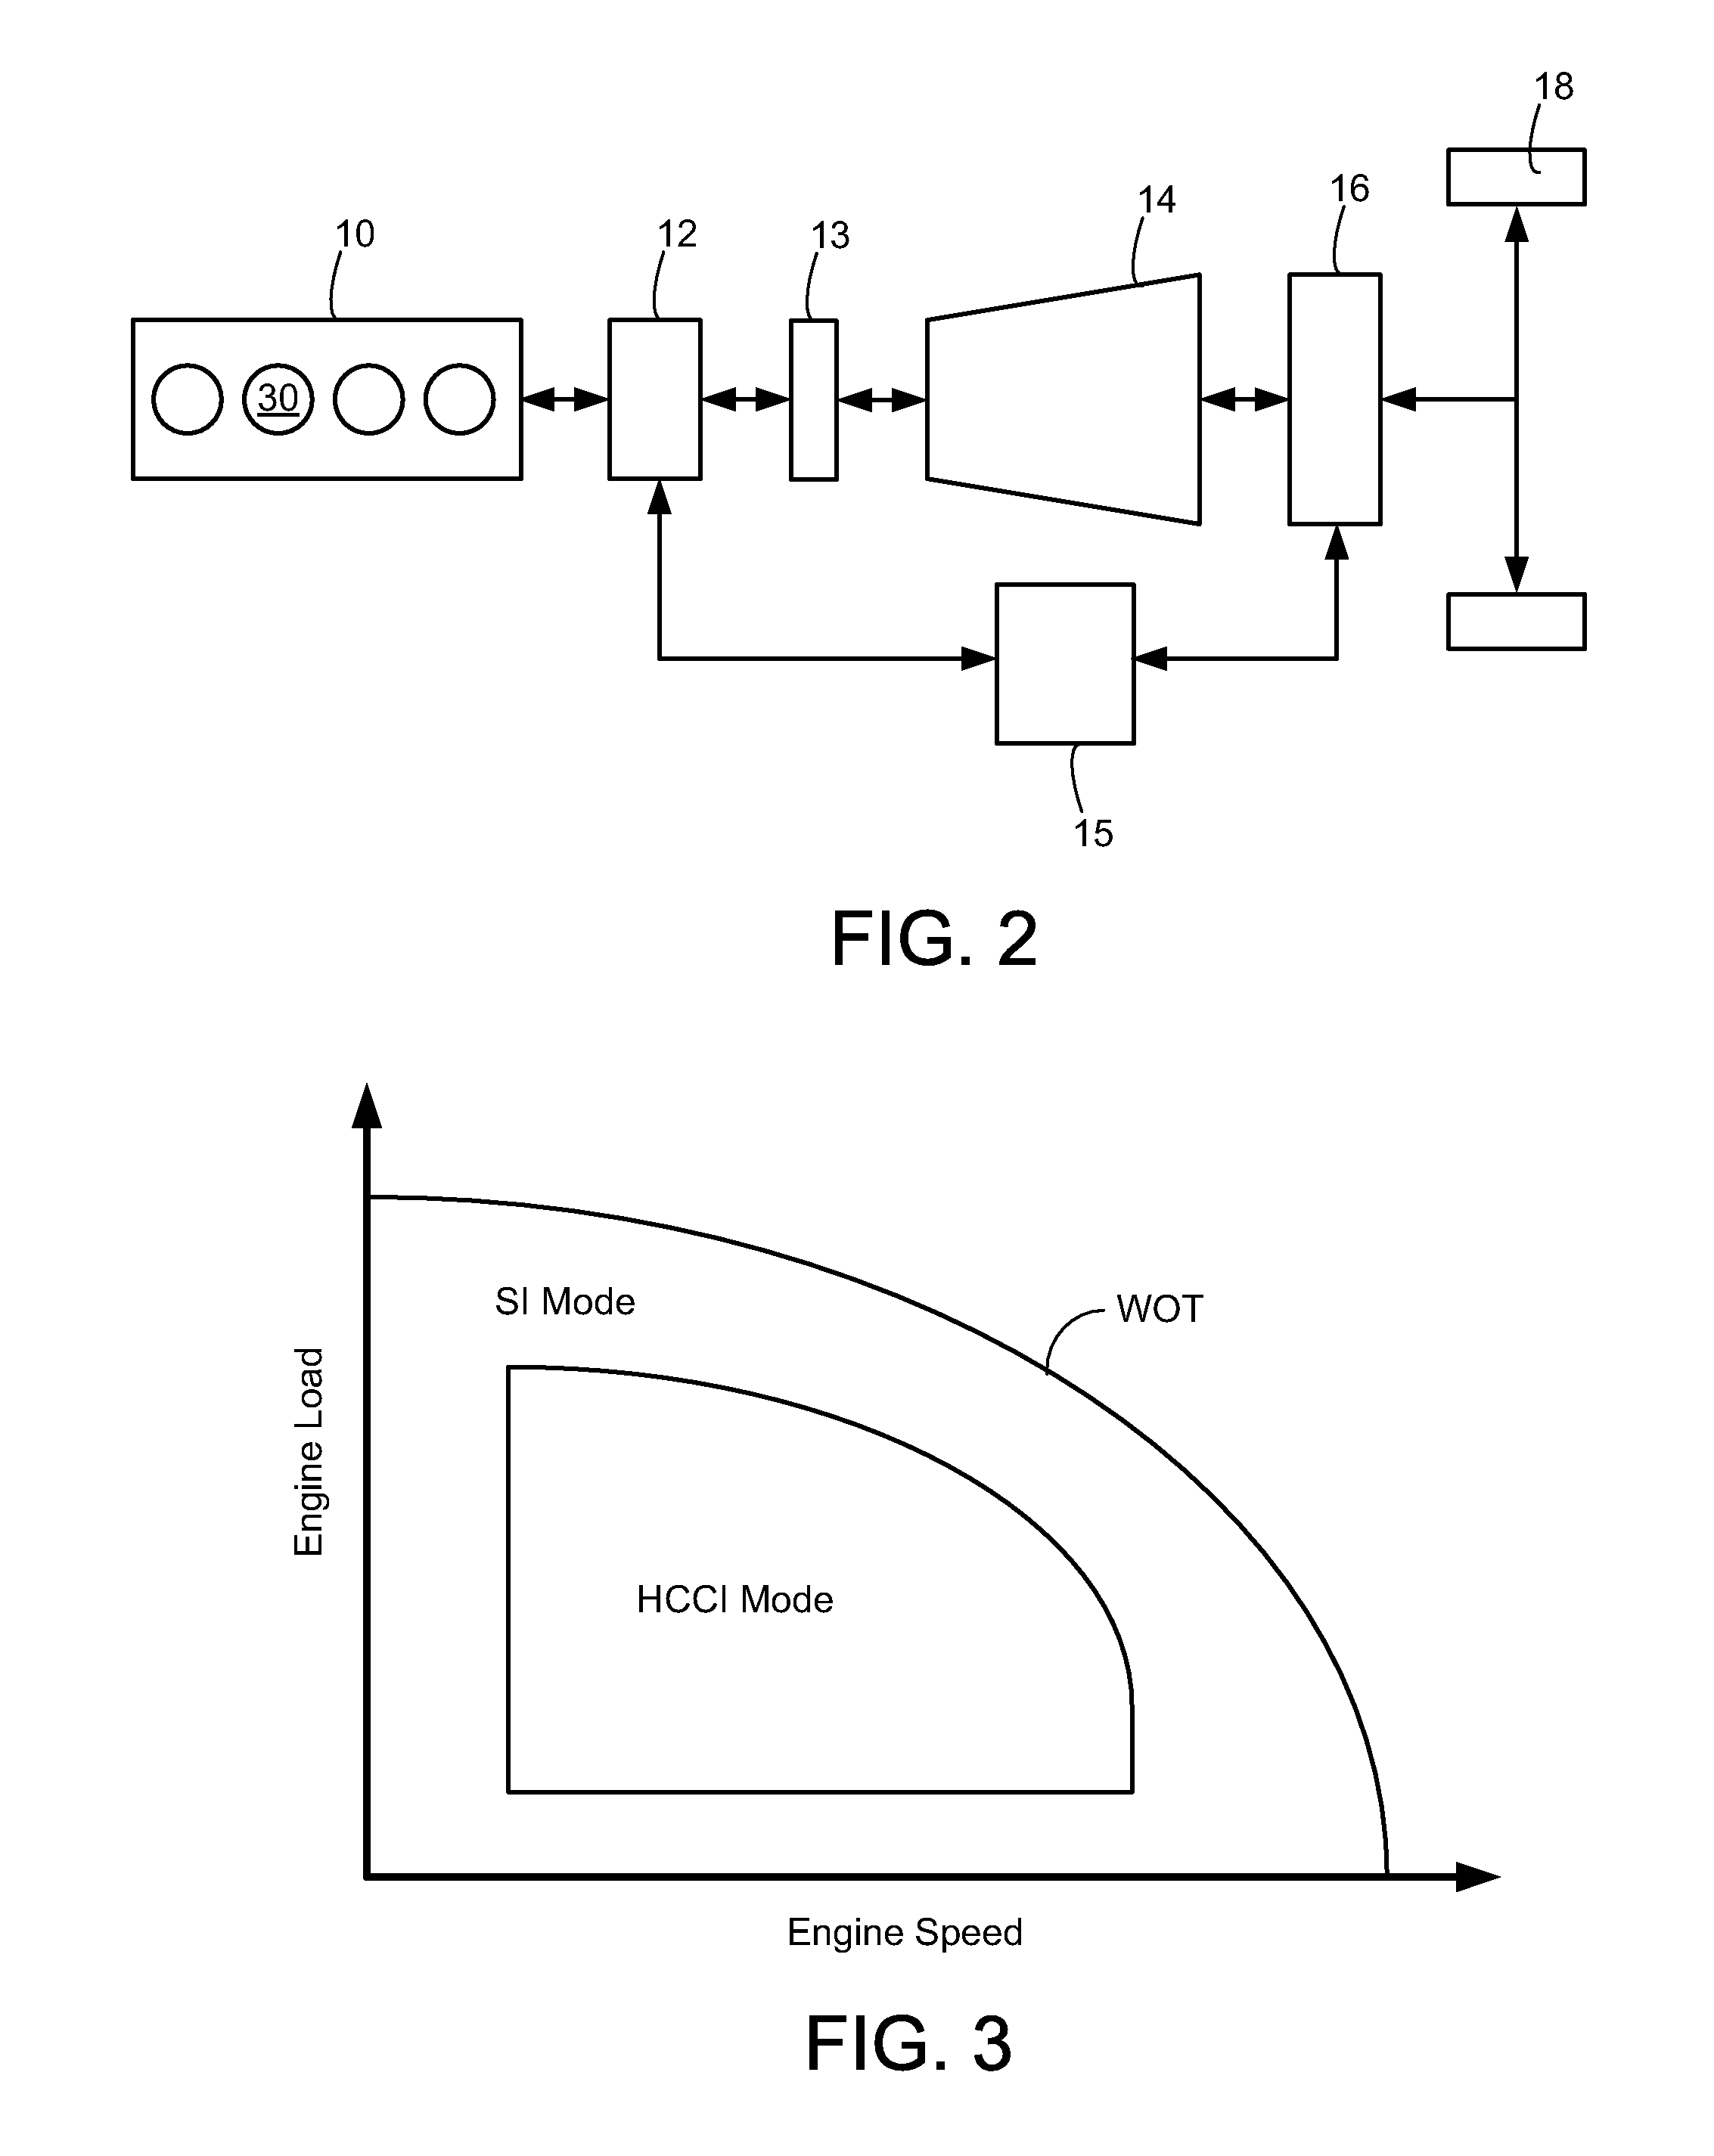 Control strategy for multi-mode vehicle propulsion system